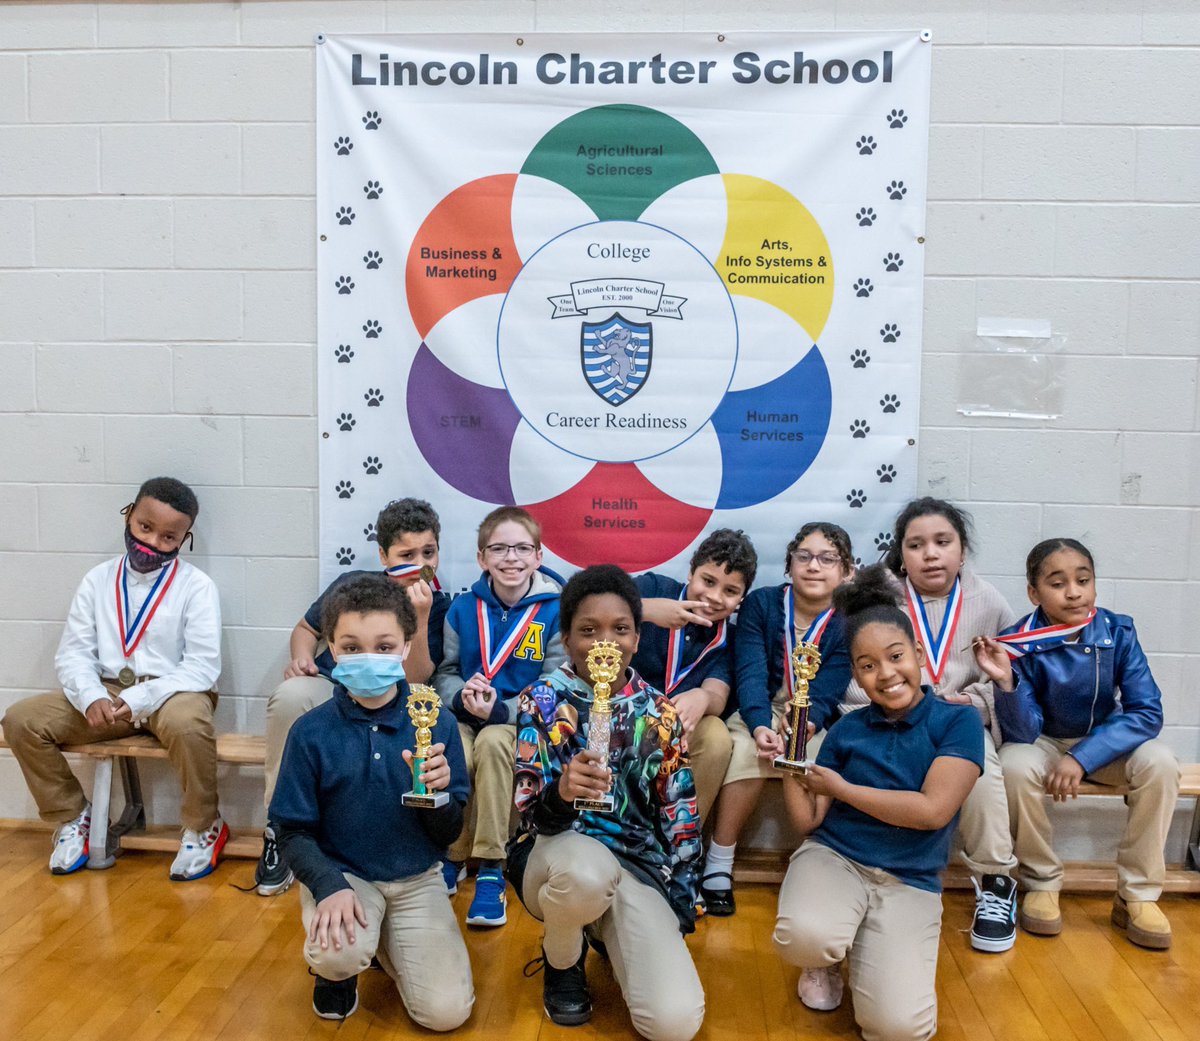 PHOTOS: Spelling Highlights Lincoln Charter Events tinyurl.com/jw26zbc6 @LCSyork